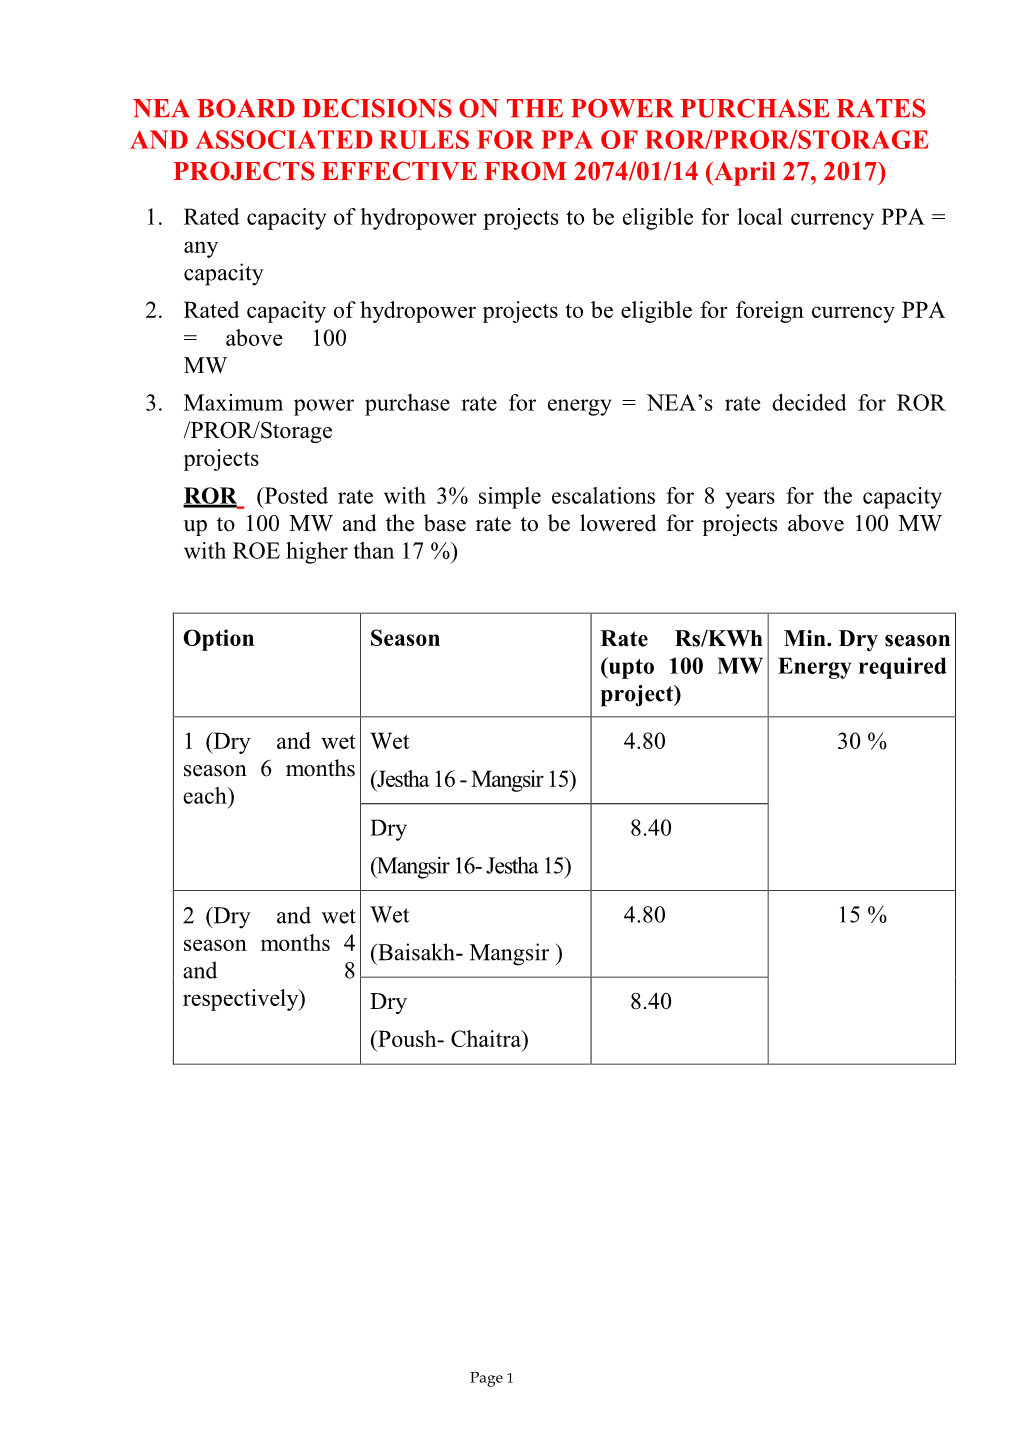 NEA BOARD DECISIONS on the POWER PURCHASE RATES and ASSOCIATED RULES for PPA of ROR/PROR/STORAGE PROJECTS EFFECTIVE from 2074/01/14 (April 27, 2017)